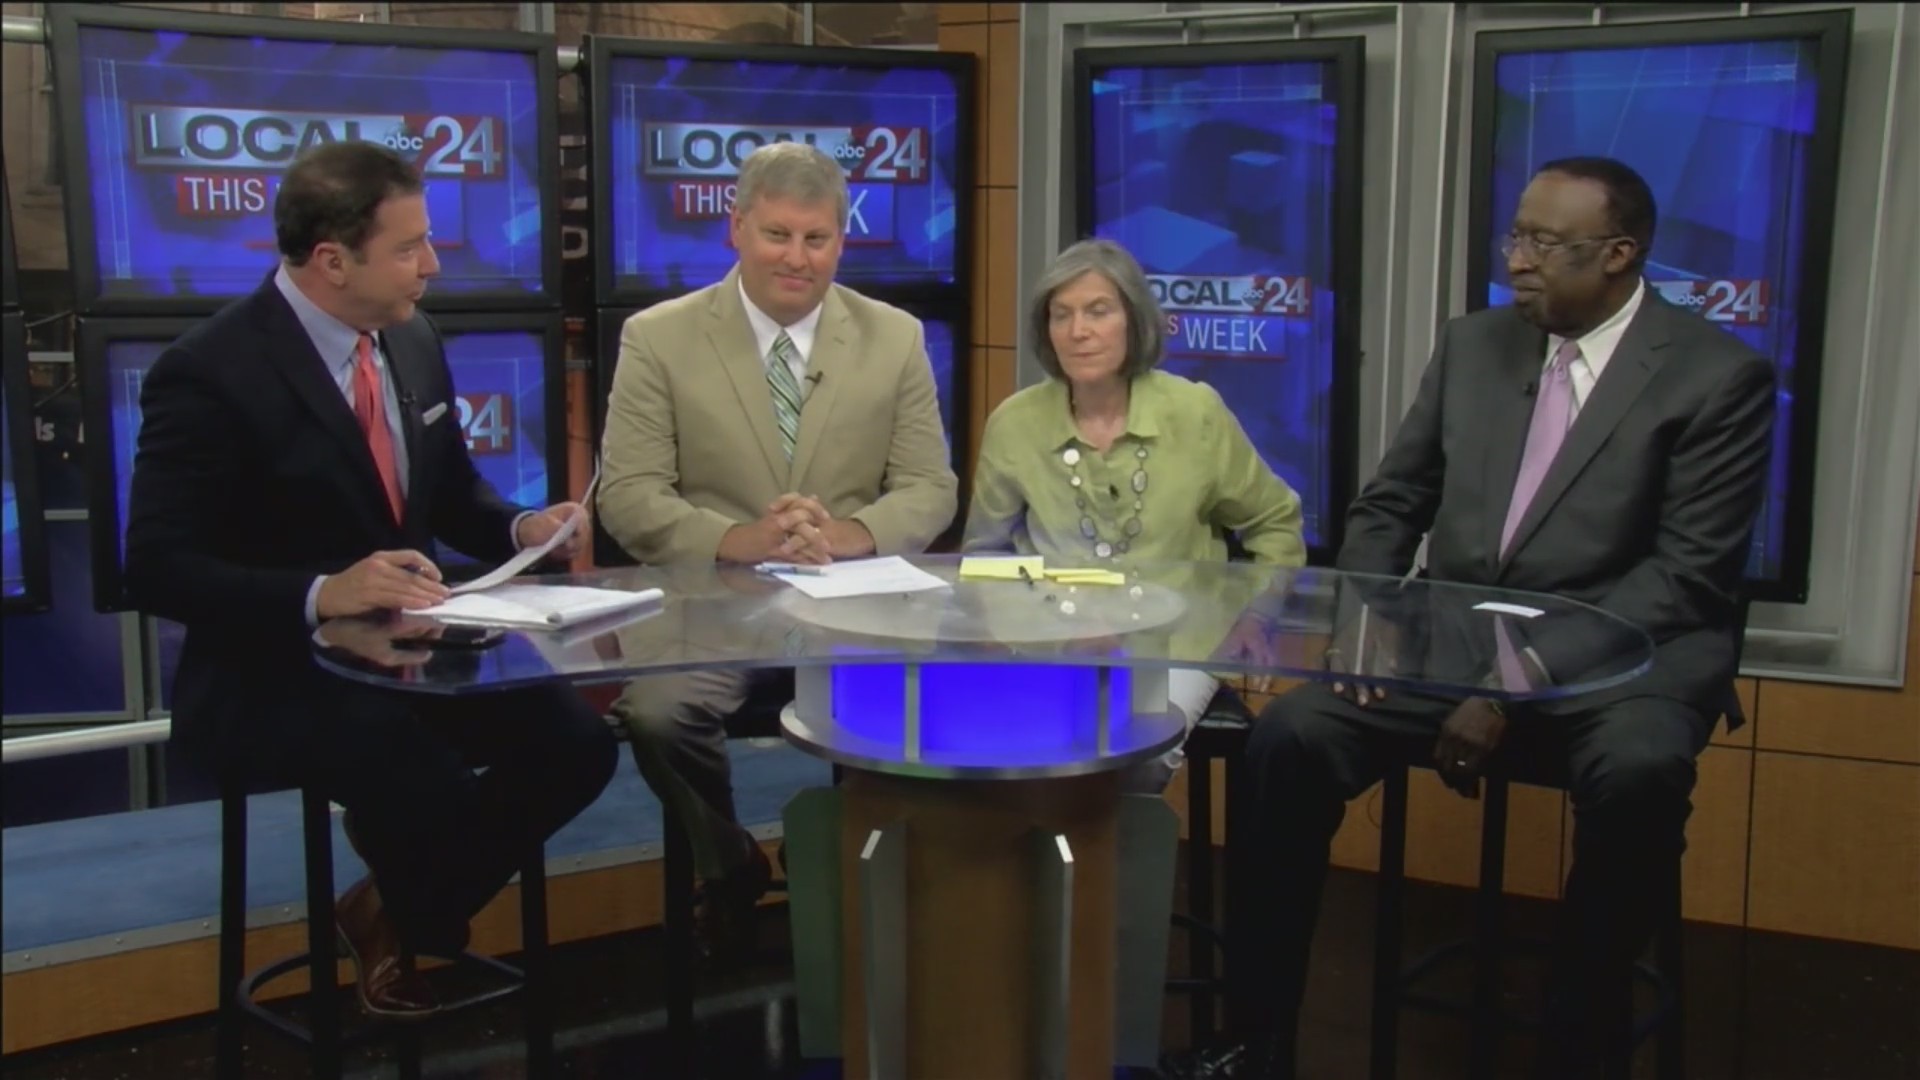 Local 24 This Week July 14, 2019